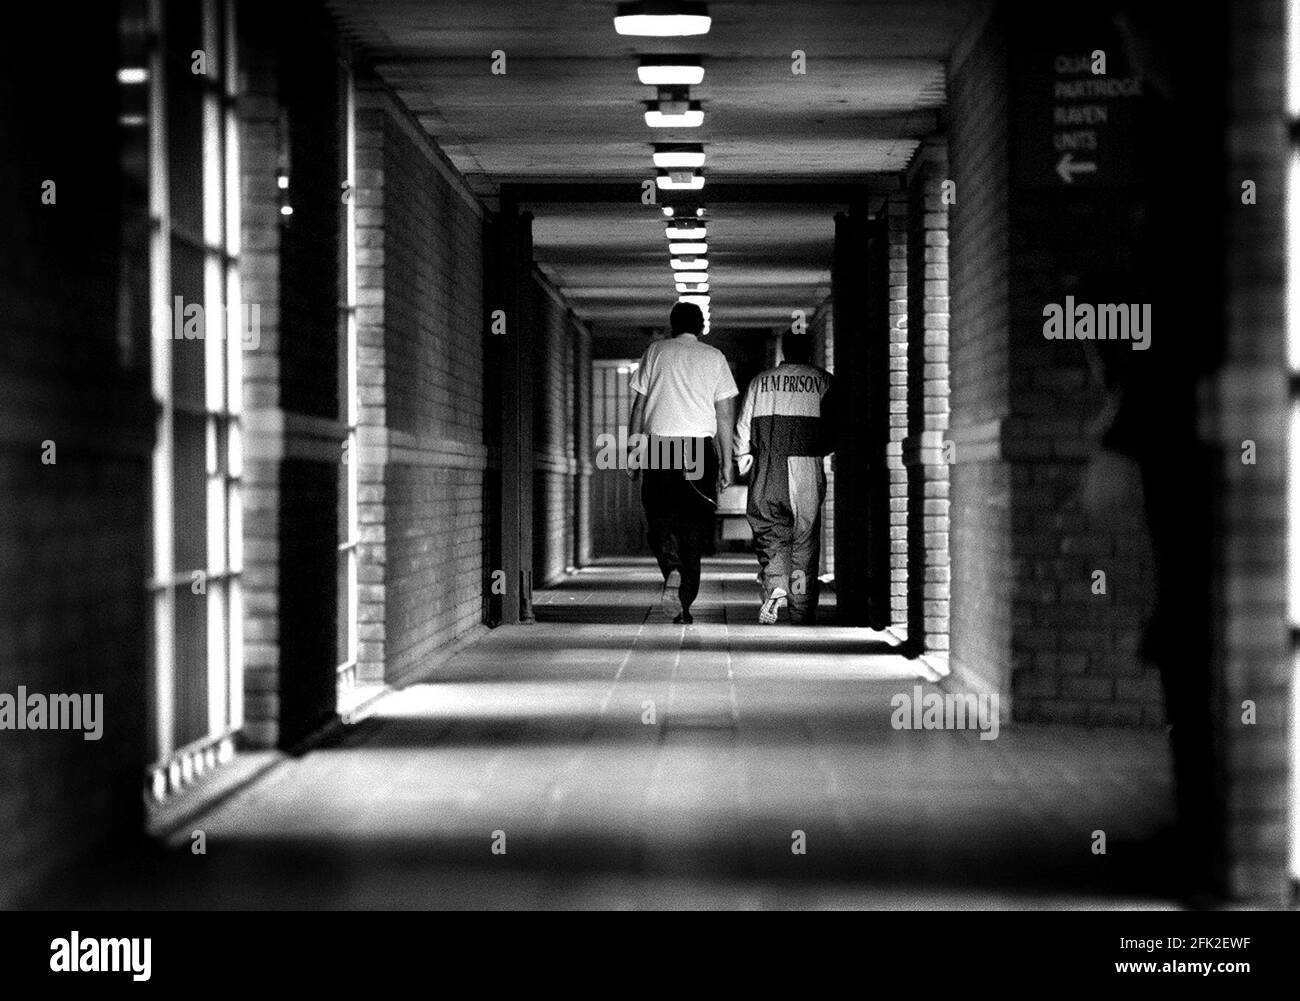 Prisoners at  Remand Centre Feltham March 1999A prison officer and a prisoner walking along a corridor in one of the house blocks The prisoner is wearing a special unifrom to identify him as an escape risk at HM Young Offenders Institution and Remand Centre Feltham   Richard Tilt the Director General of the Prison Service visitied the institution today the day before his retirement Stock Photo